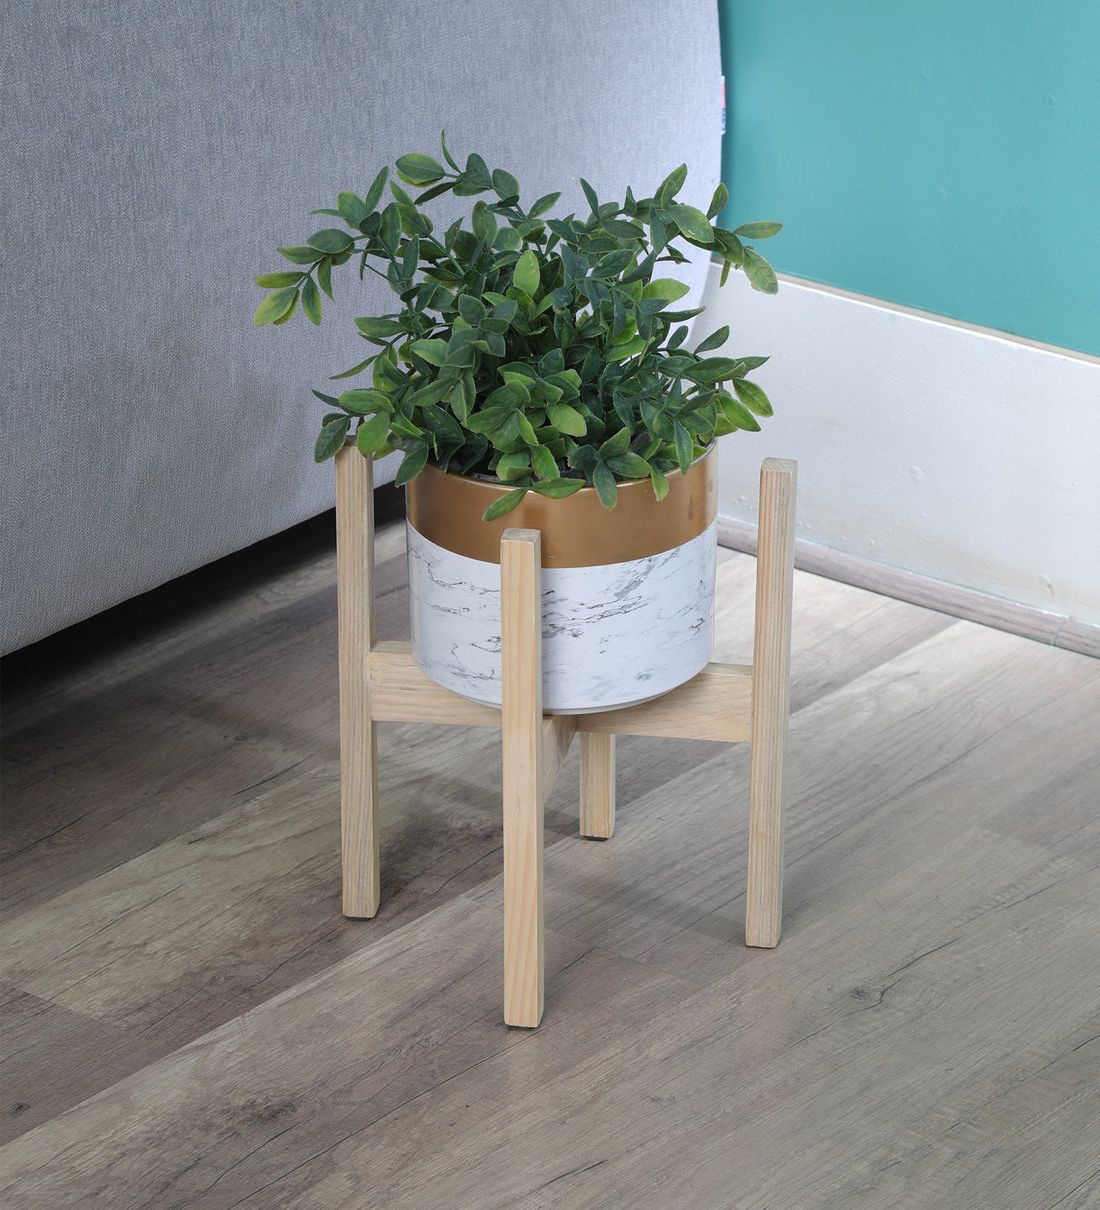 Buy Wooden Planter Standlycka Online – Wooden Planter Stands – Pots &  Planters – Home Decor – Pepperfry Product In Most Recently Released Wooden Plant Stands (View 4 of 15)